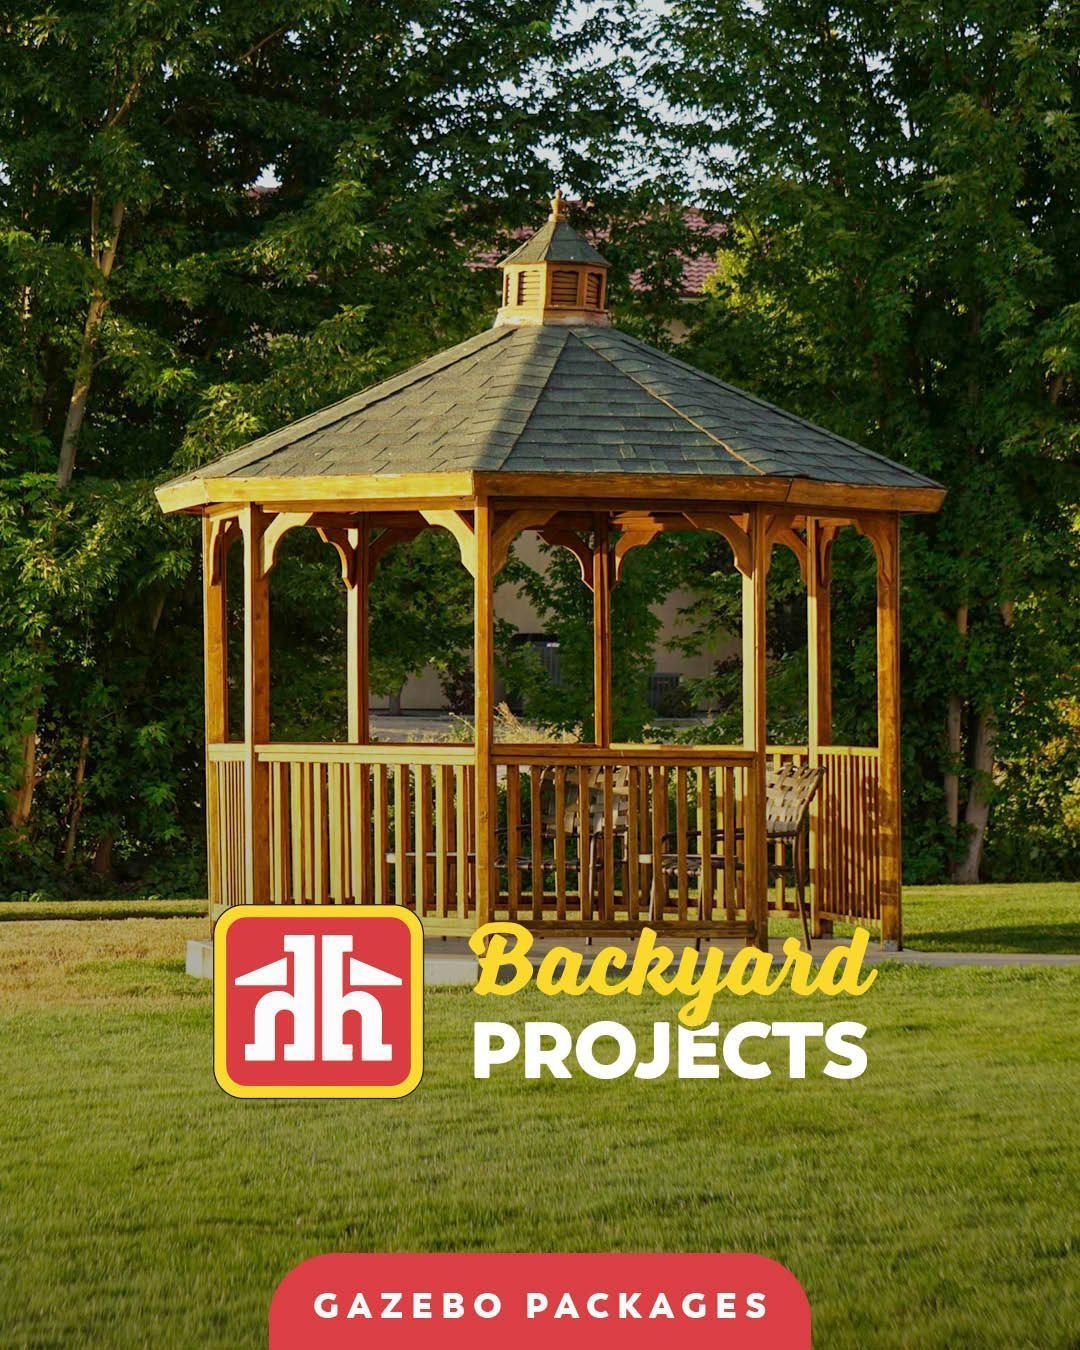 Turn your backyard dreams into reality with Home Hardware's complete gazebo building packages! Our kits have everything you need to craft the perfect outdoor retreat for leisurely afternoons and enchanting starlit evenings. 

From sturdy frames to el